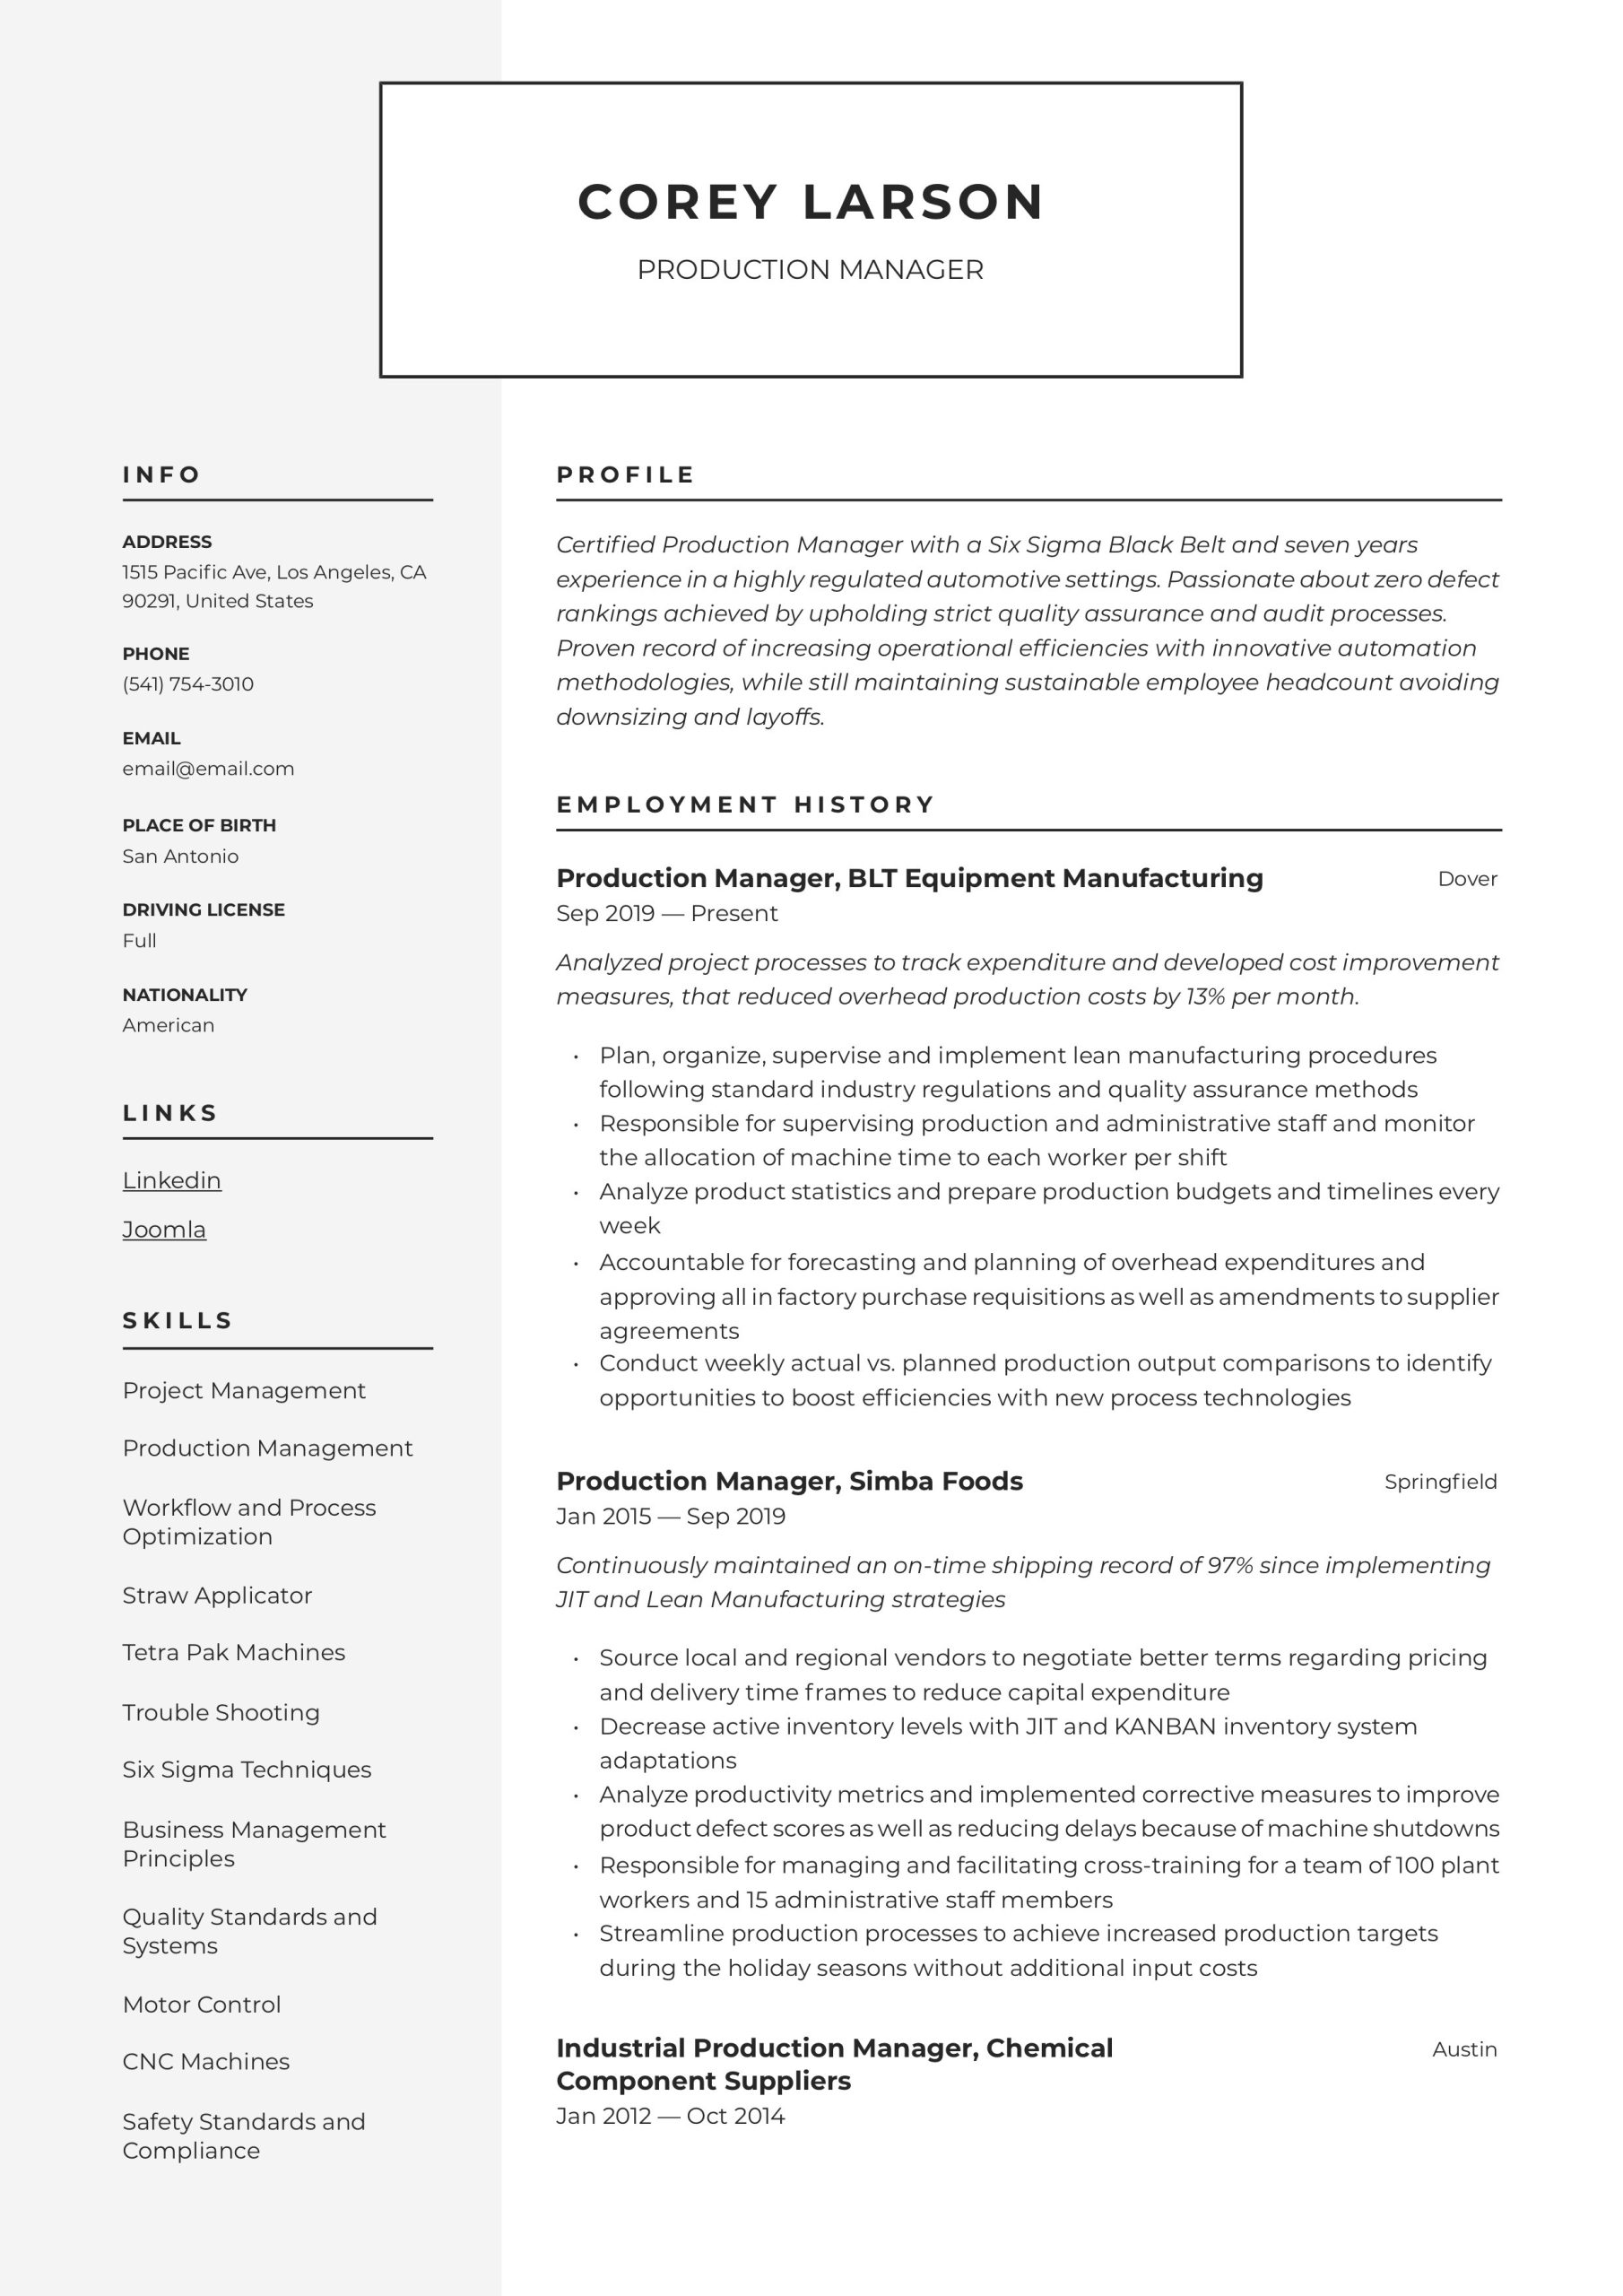 Sample Resume In Pharmaceutical Production Supervisor Production Manager Resume & Writing Guide  12 Templates 2020